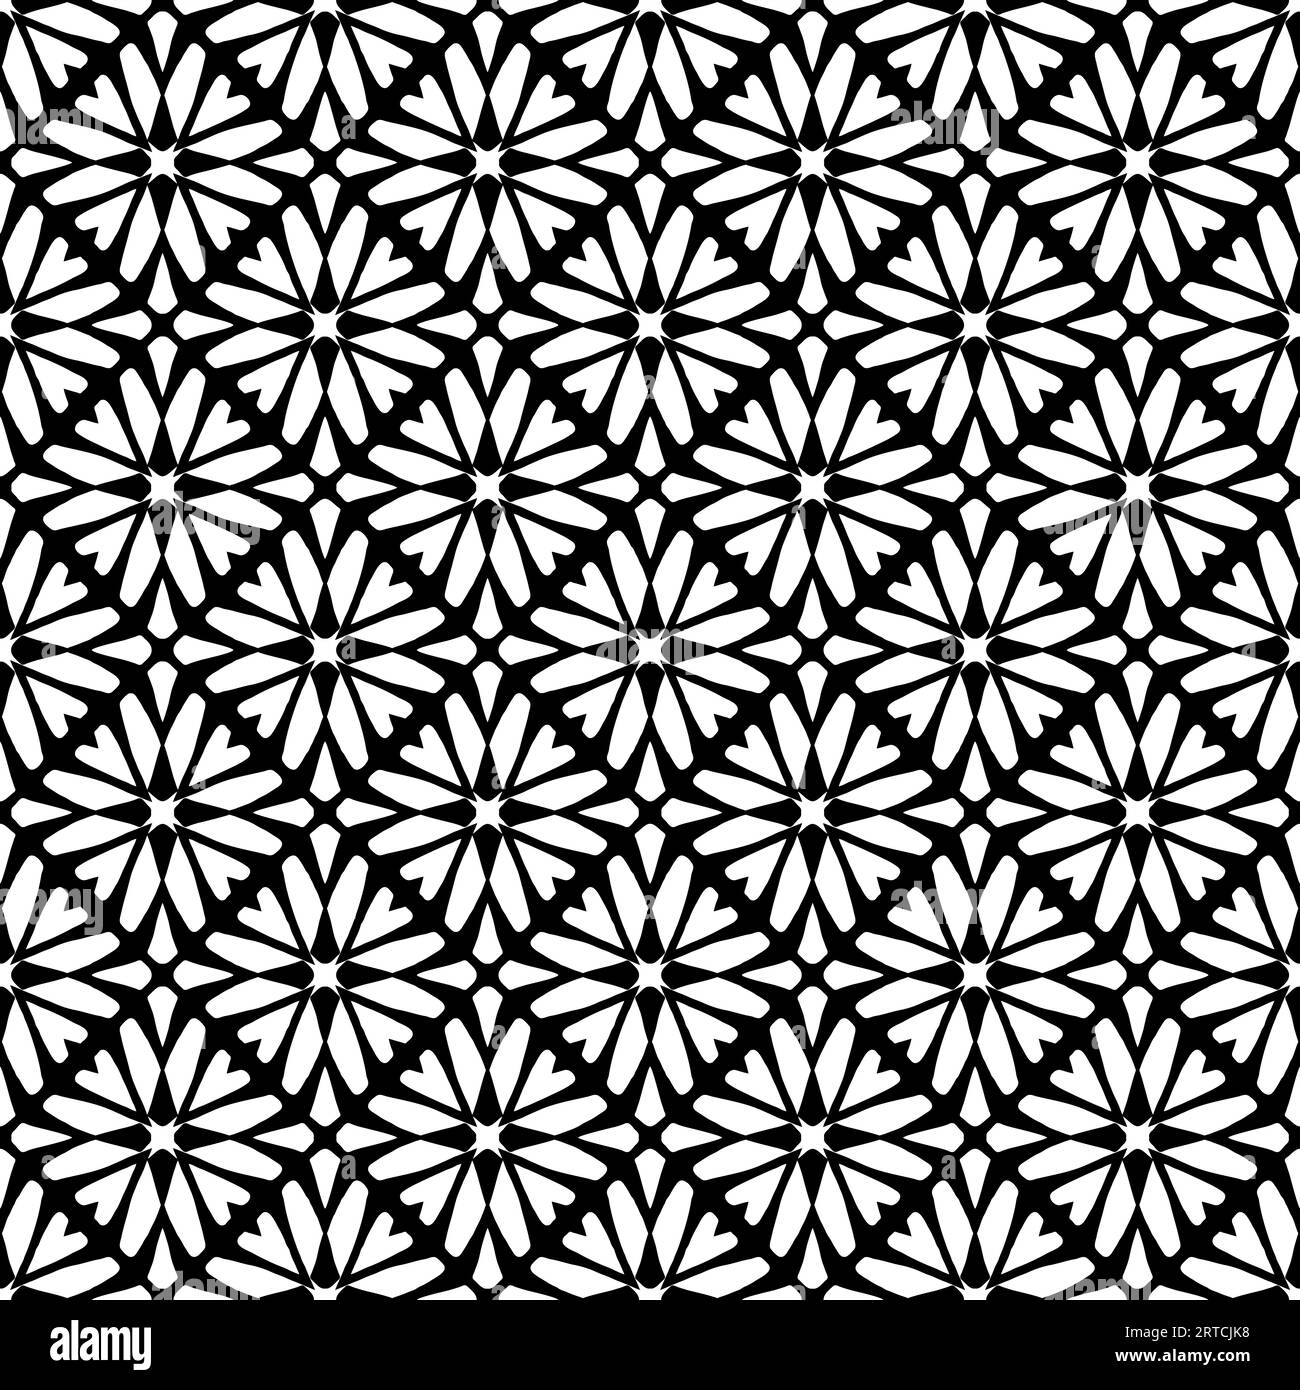 Seamless pattern with ethnic motifs in black and white Stock Photo